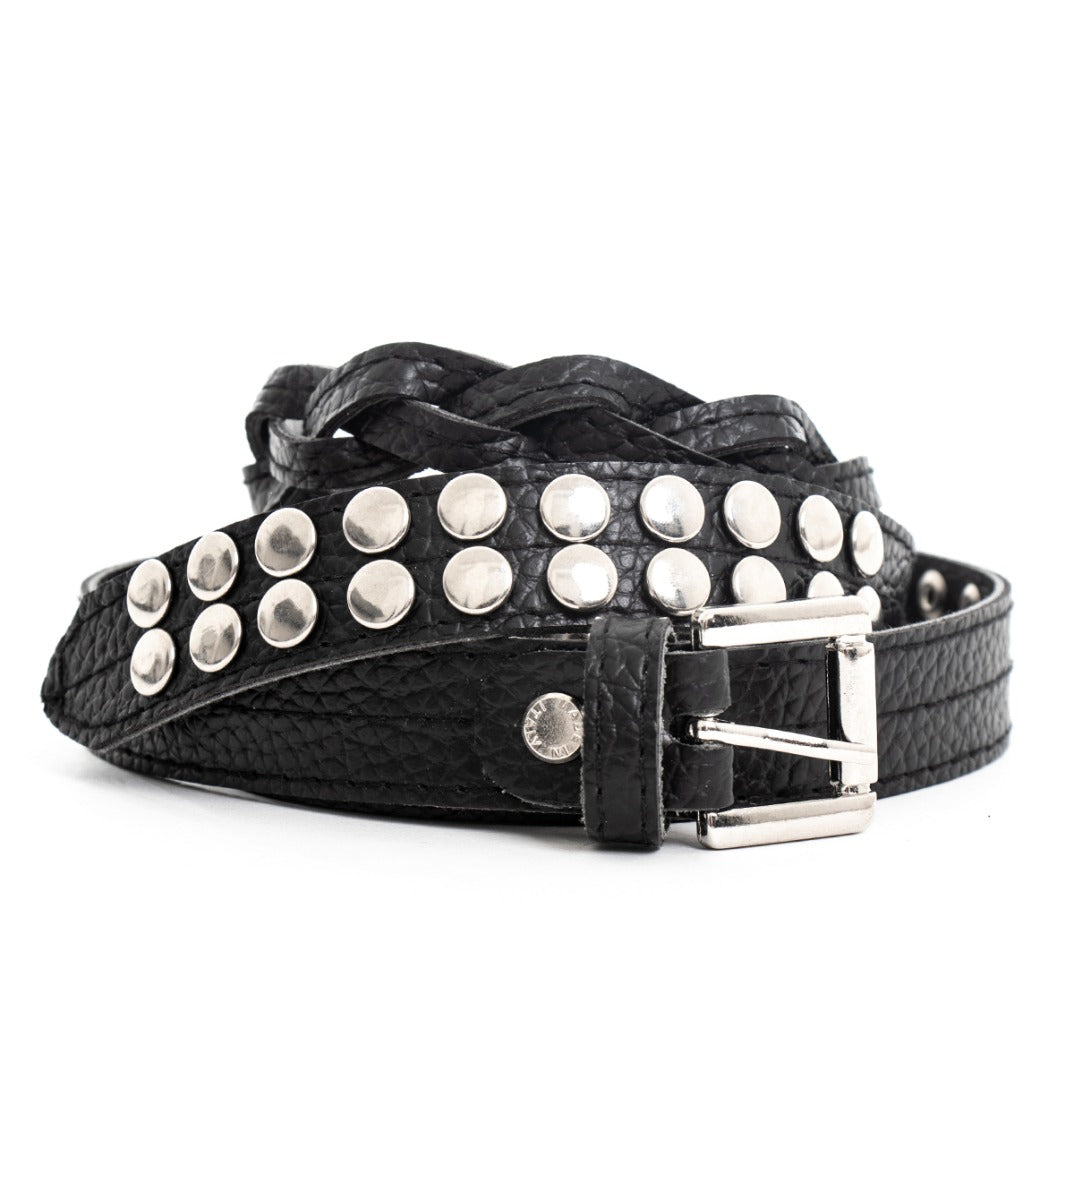 Men's Belt With Studs Adjustable Black Metal Braided Belt Faux Leather GIOSAL-A2053A